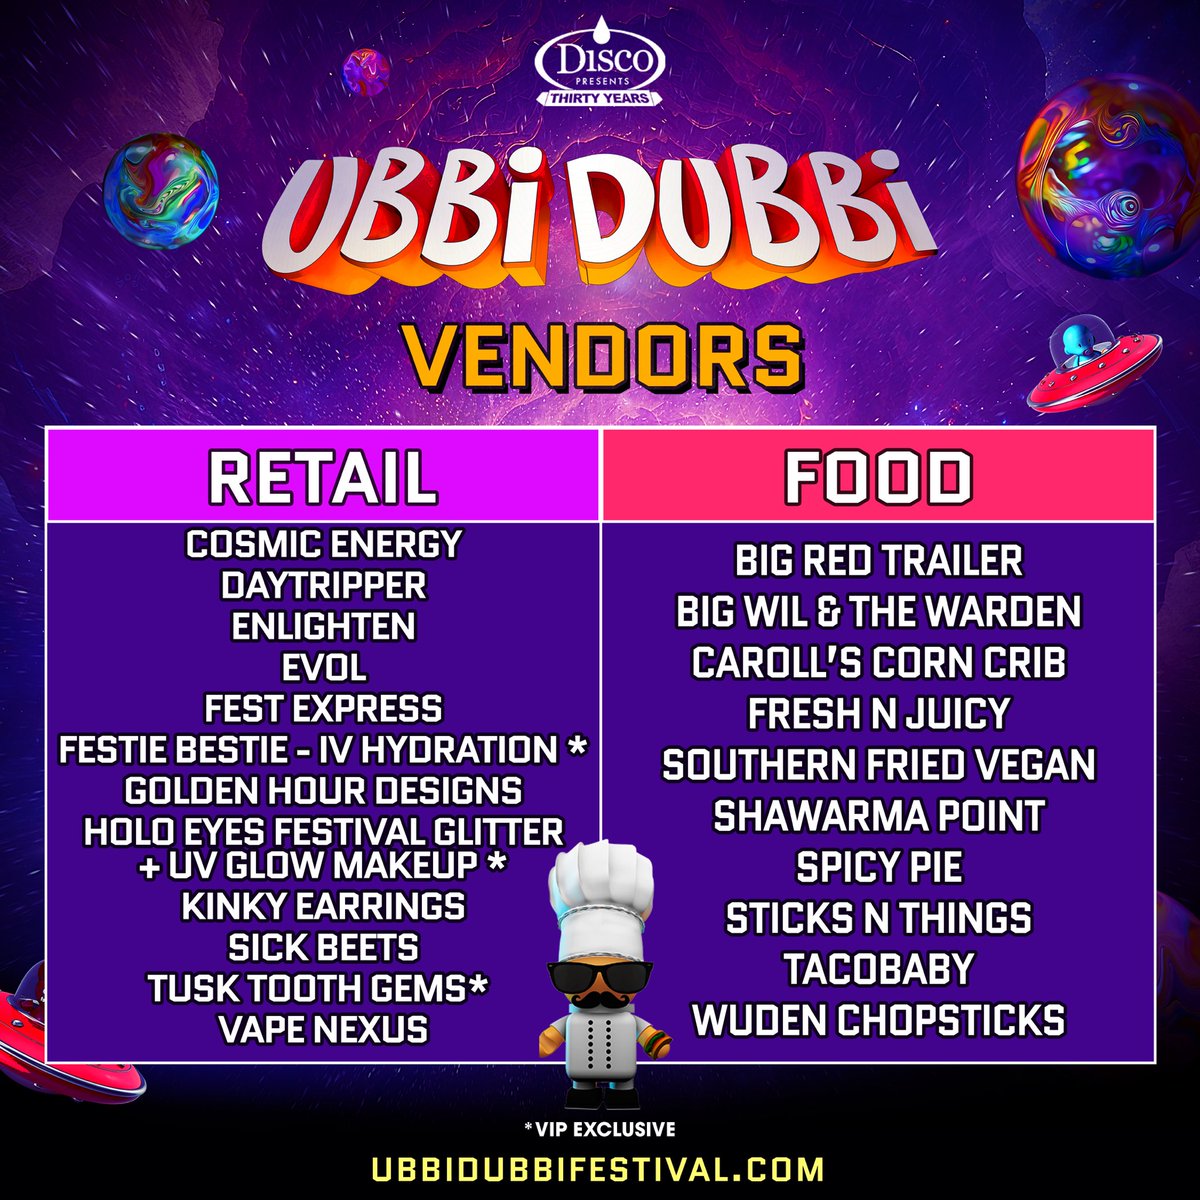 Satisfy all your Ubbi Dubbi cravings with Grubbi’s handpicked selection of food & retail vendors!🧑‍🍳🛍️